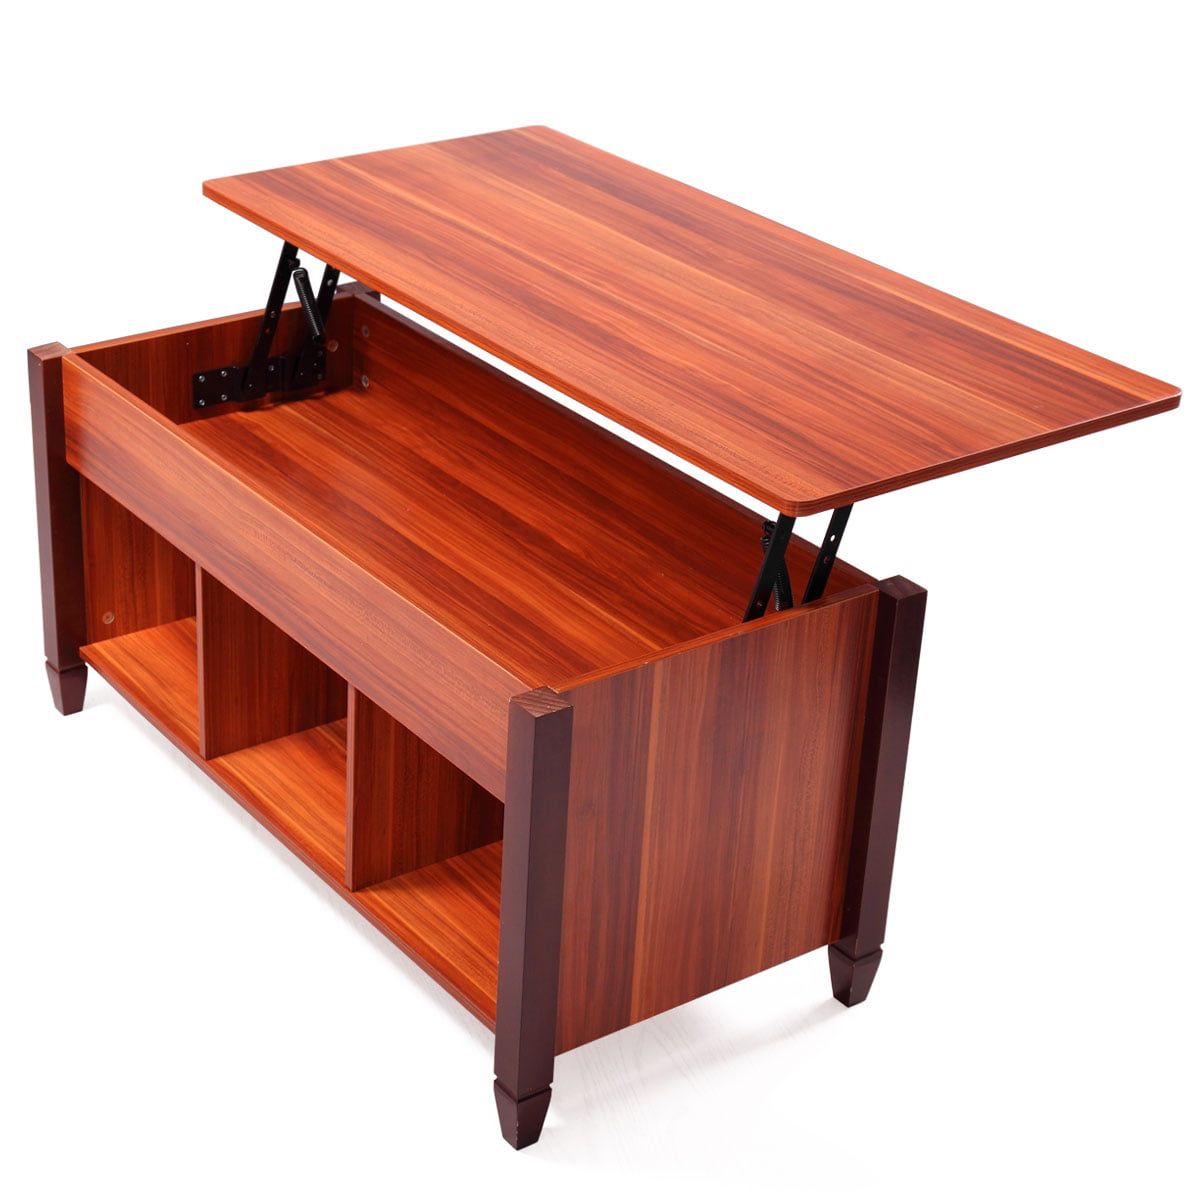 Jaxpety Lift Top Convertible Coffee Table Solid Wood Desk Storage Regarding Wood Lift Top Coffee Tables (View 16 of 20)